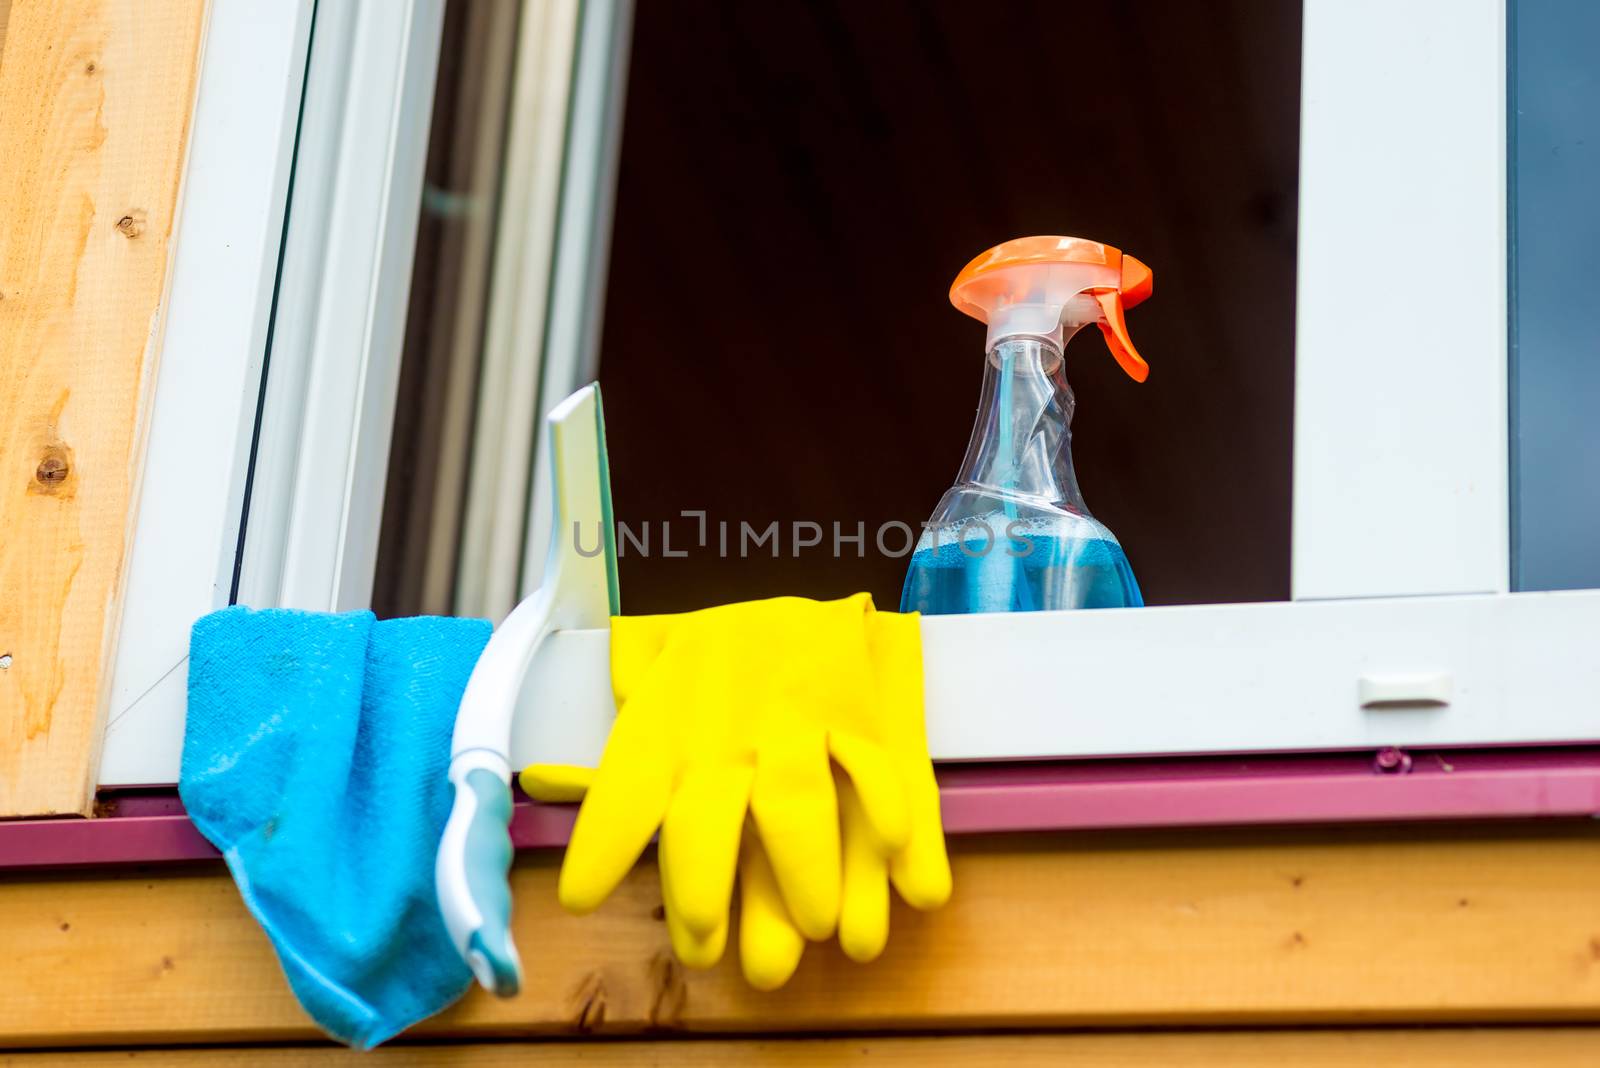 window cleaning tools on window sill close up by kosmsos111